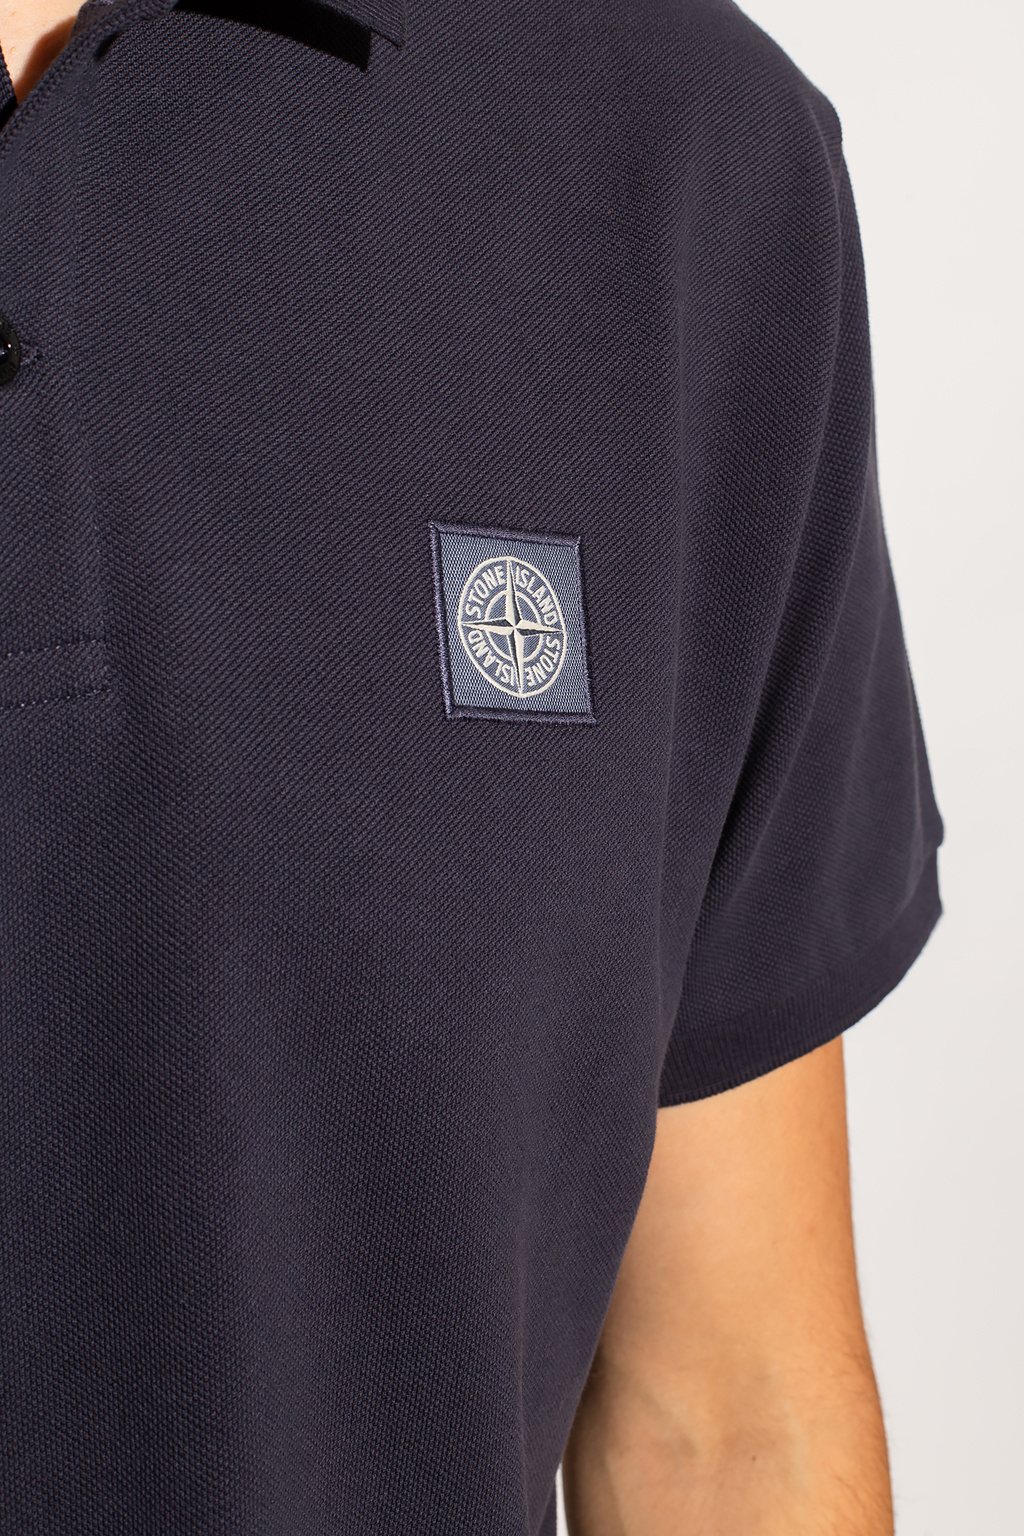 Stone Island Our Legacy Evening Knit Polo